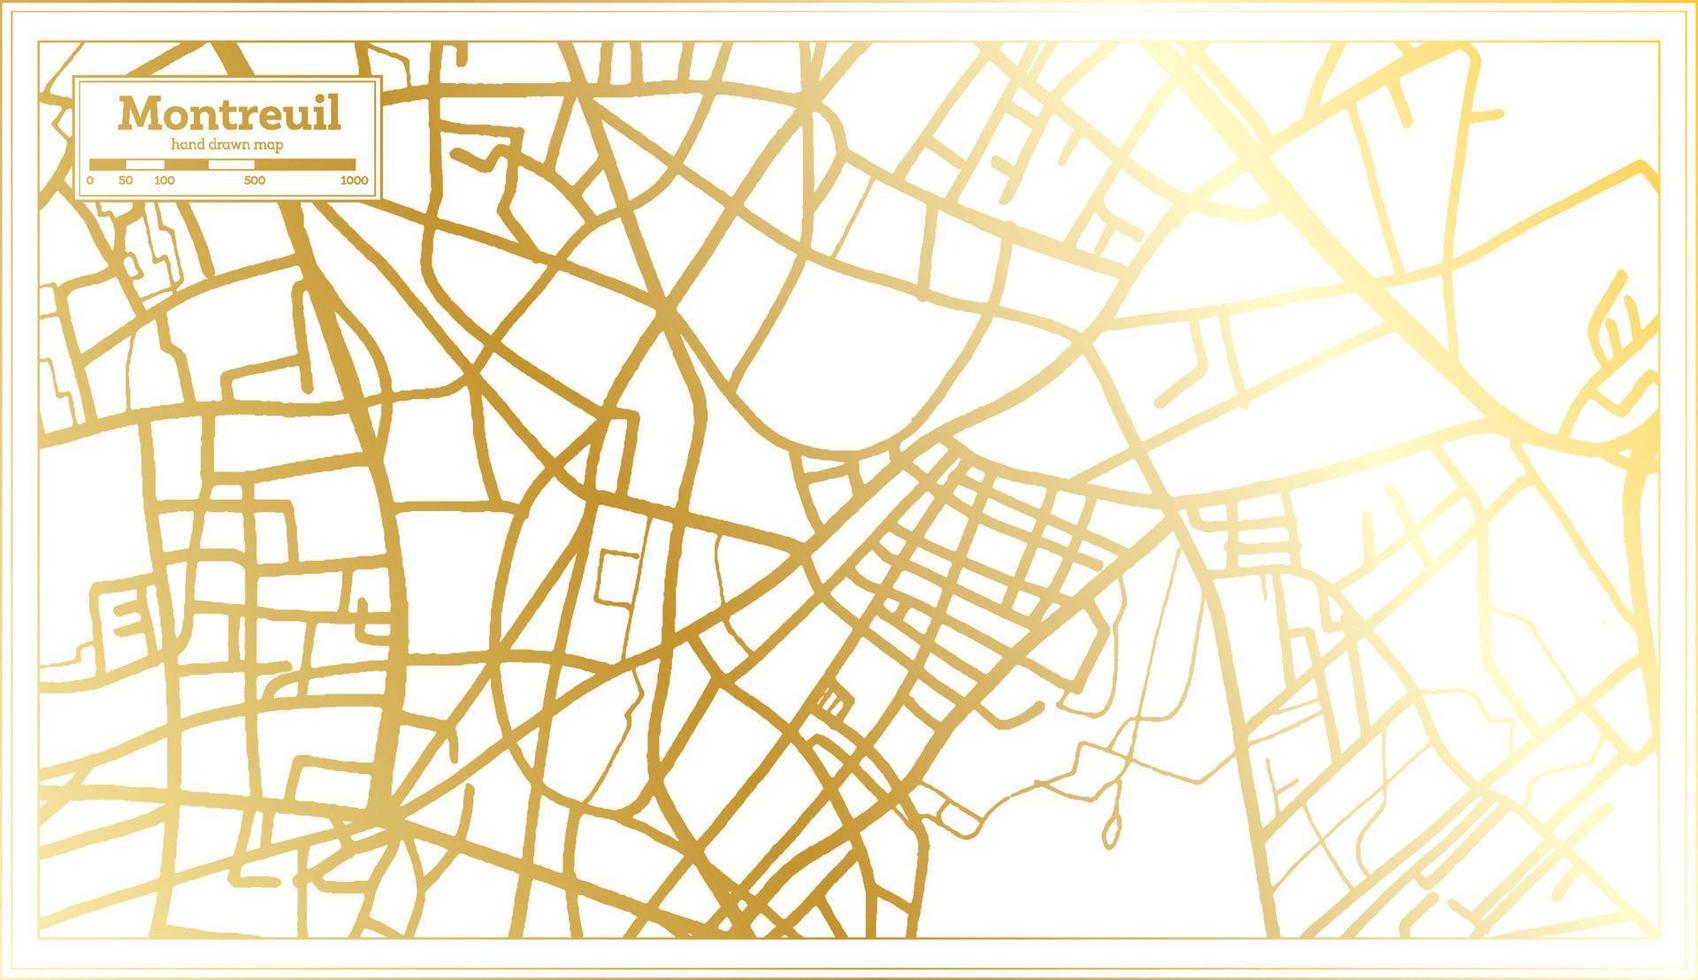 Montreuil France City Map in Retro Style in Golden Color. Outline Map. vector